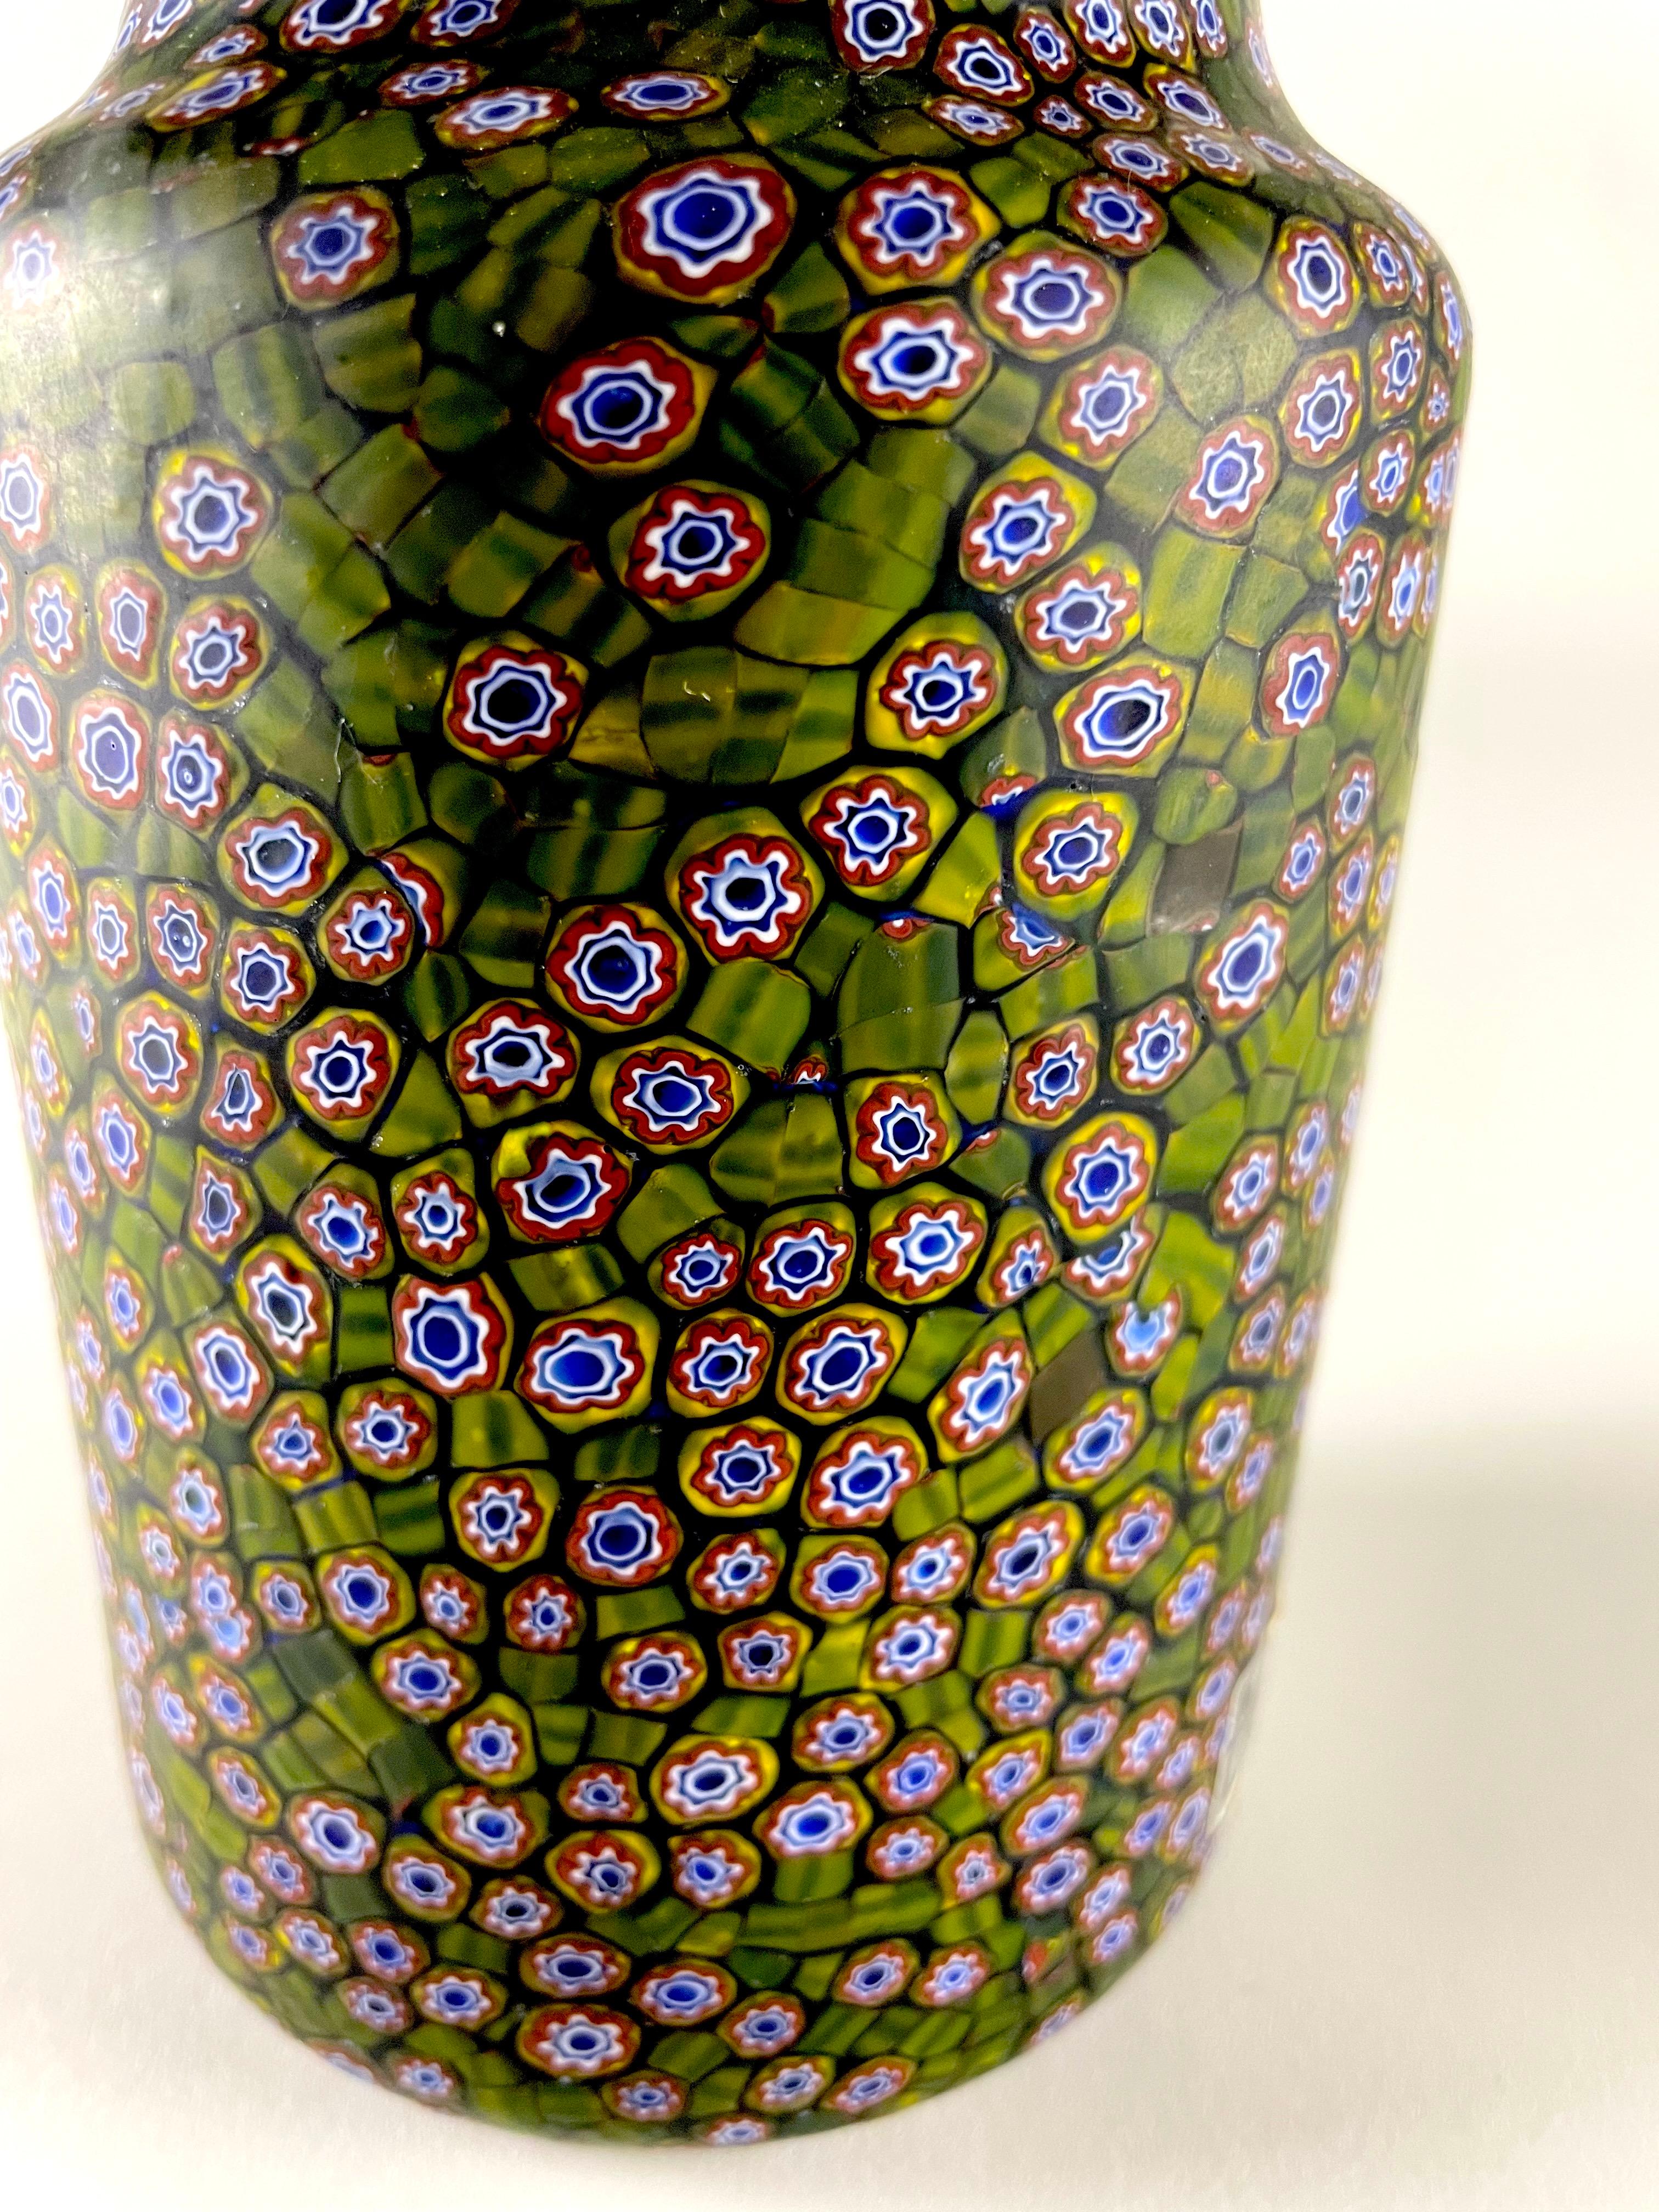 GIARDINO vase by Fratelli Toso - rare example made with this peculiar very small murrina millefiori and a special dark green one. This modern and innovative design hails from the 60s and showcases the true craftsmanship that made Fratelli Toso